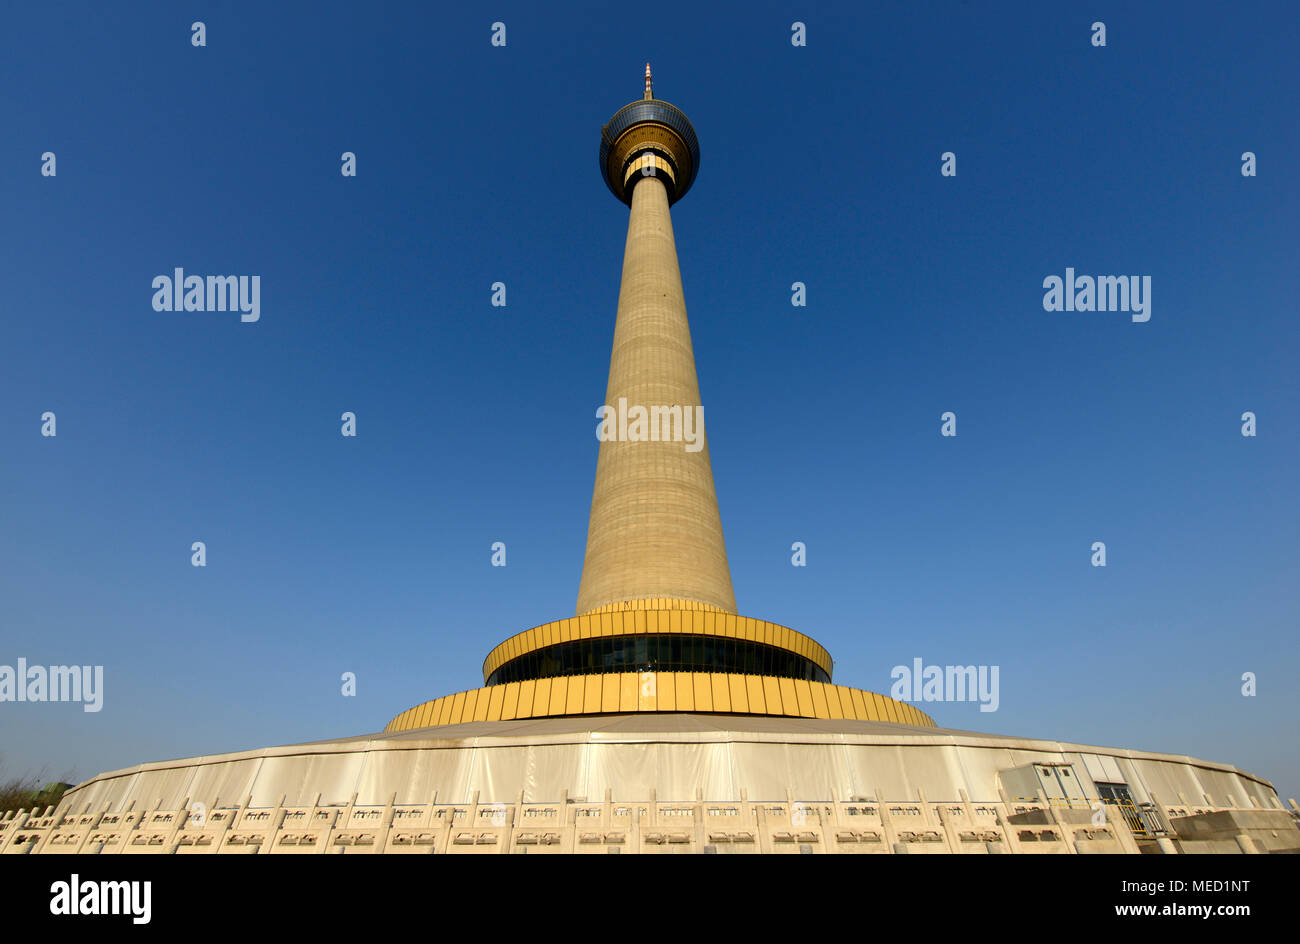 China Central Television tower in Beijing, China, seen from the base - the tower opened in 1994 Stock Photo